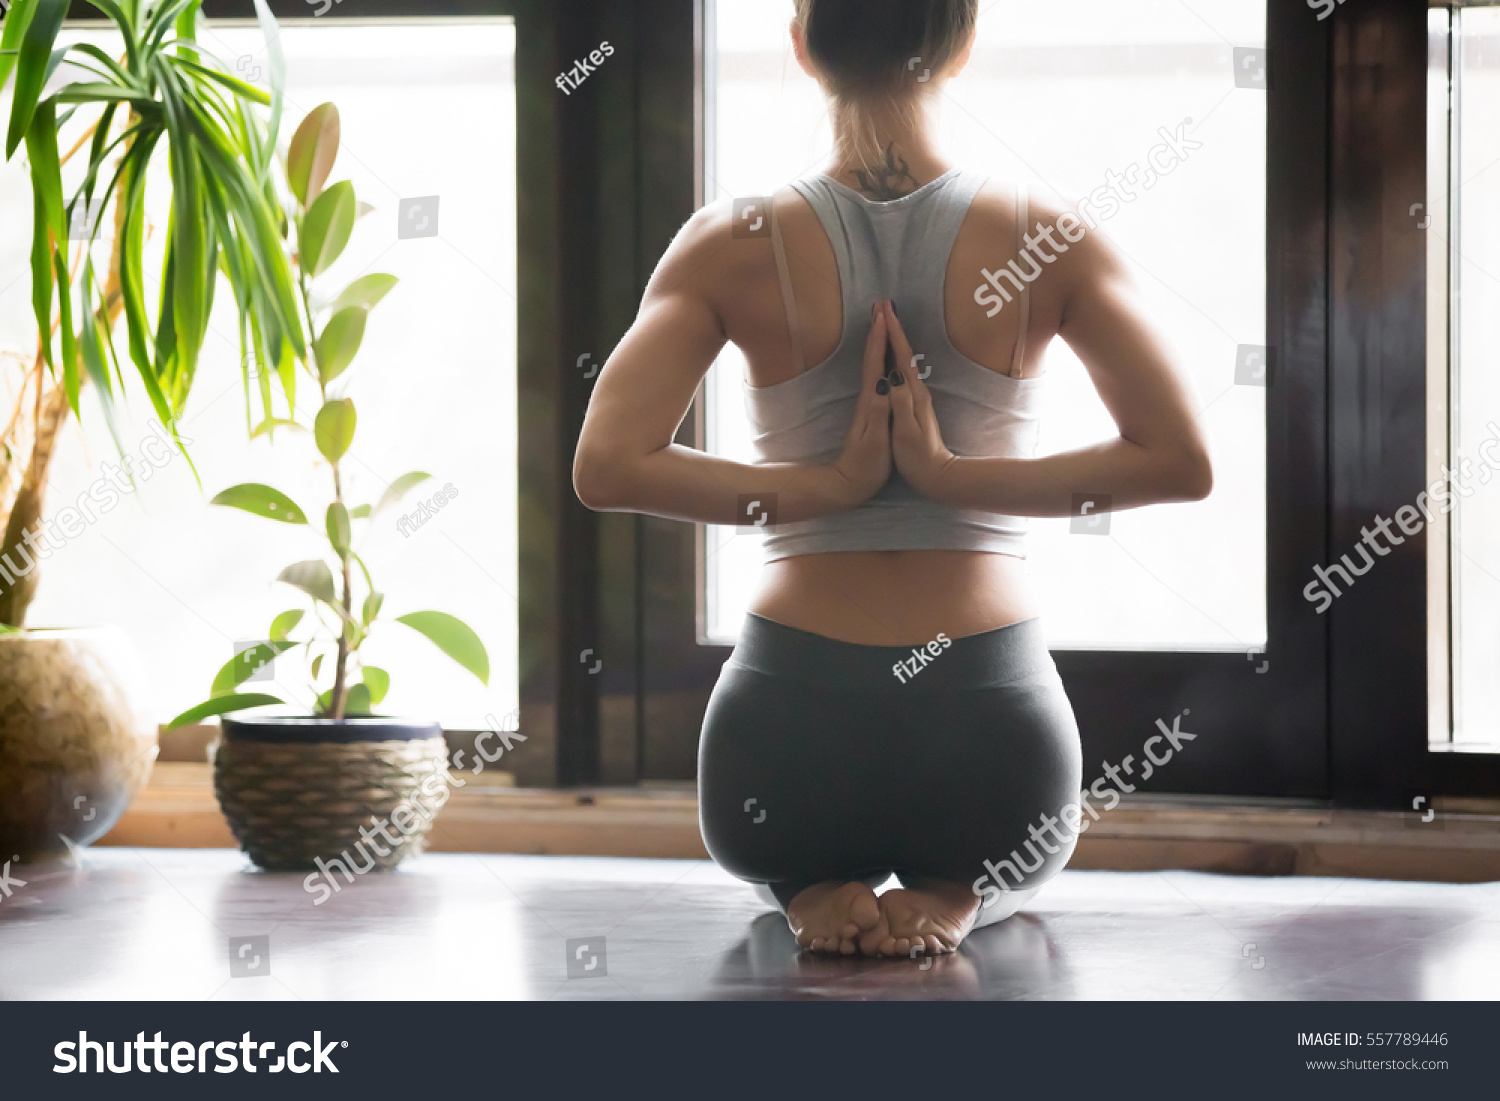 Young woman practicing yoga with namaste behind the back, sitting in seiza exercise, vajrasana pose, working out, wearing sportswear, grey pants, bra, indoor, home interior background, rear view #557789446